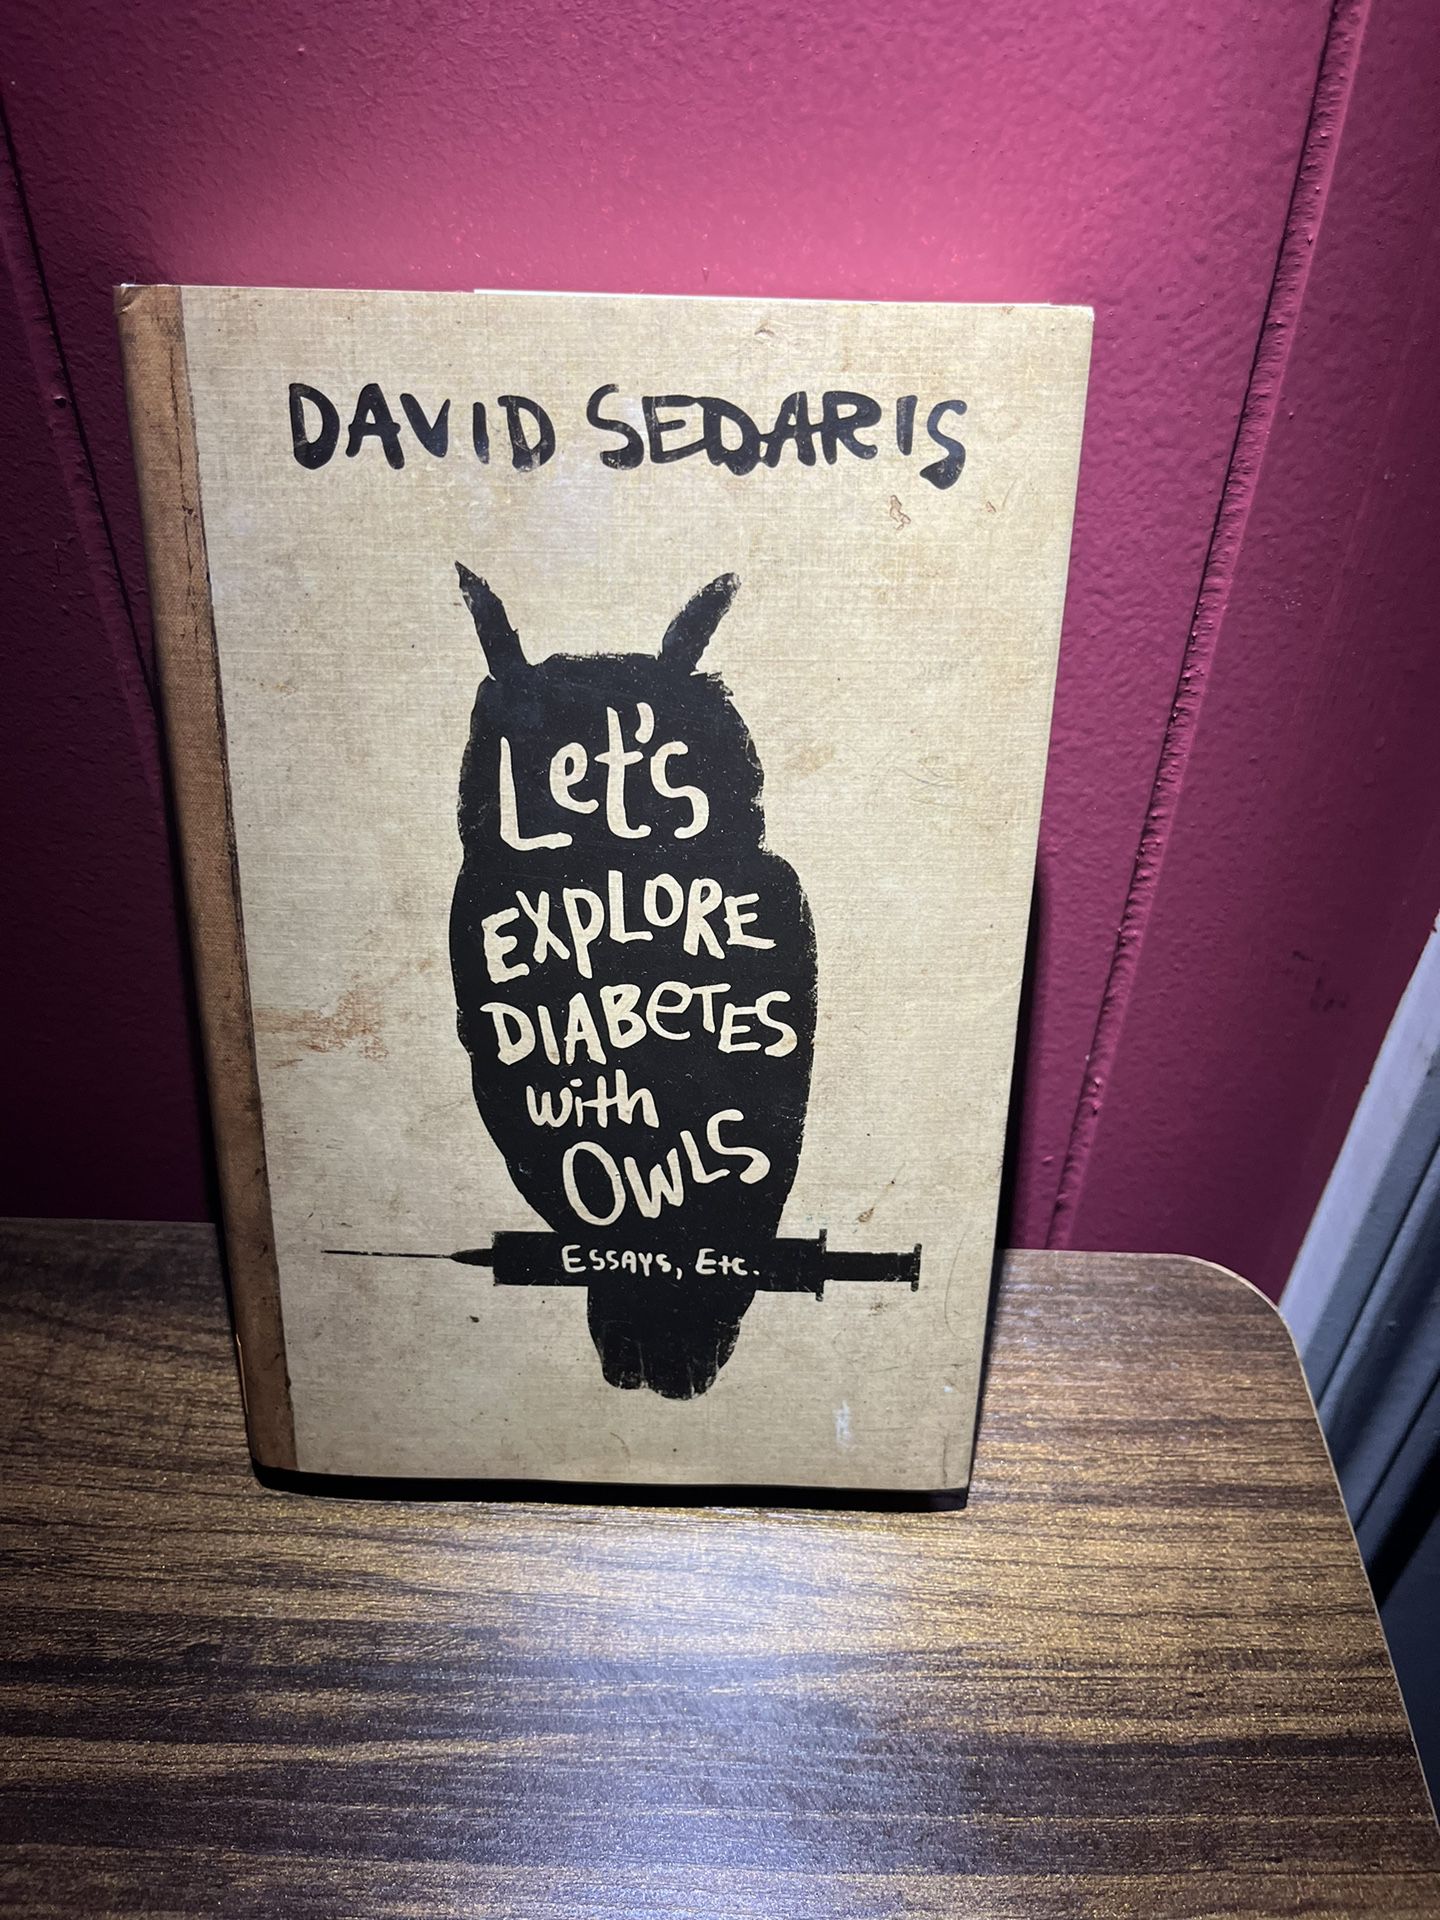 Signed First Edition “Let’s Explore Diabetes with Owls” by David Sedaris w/ Stub